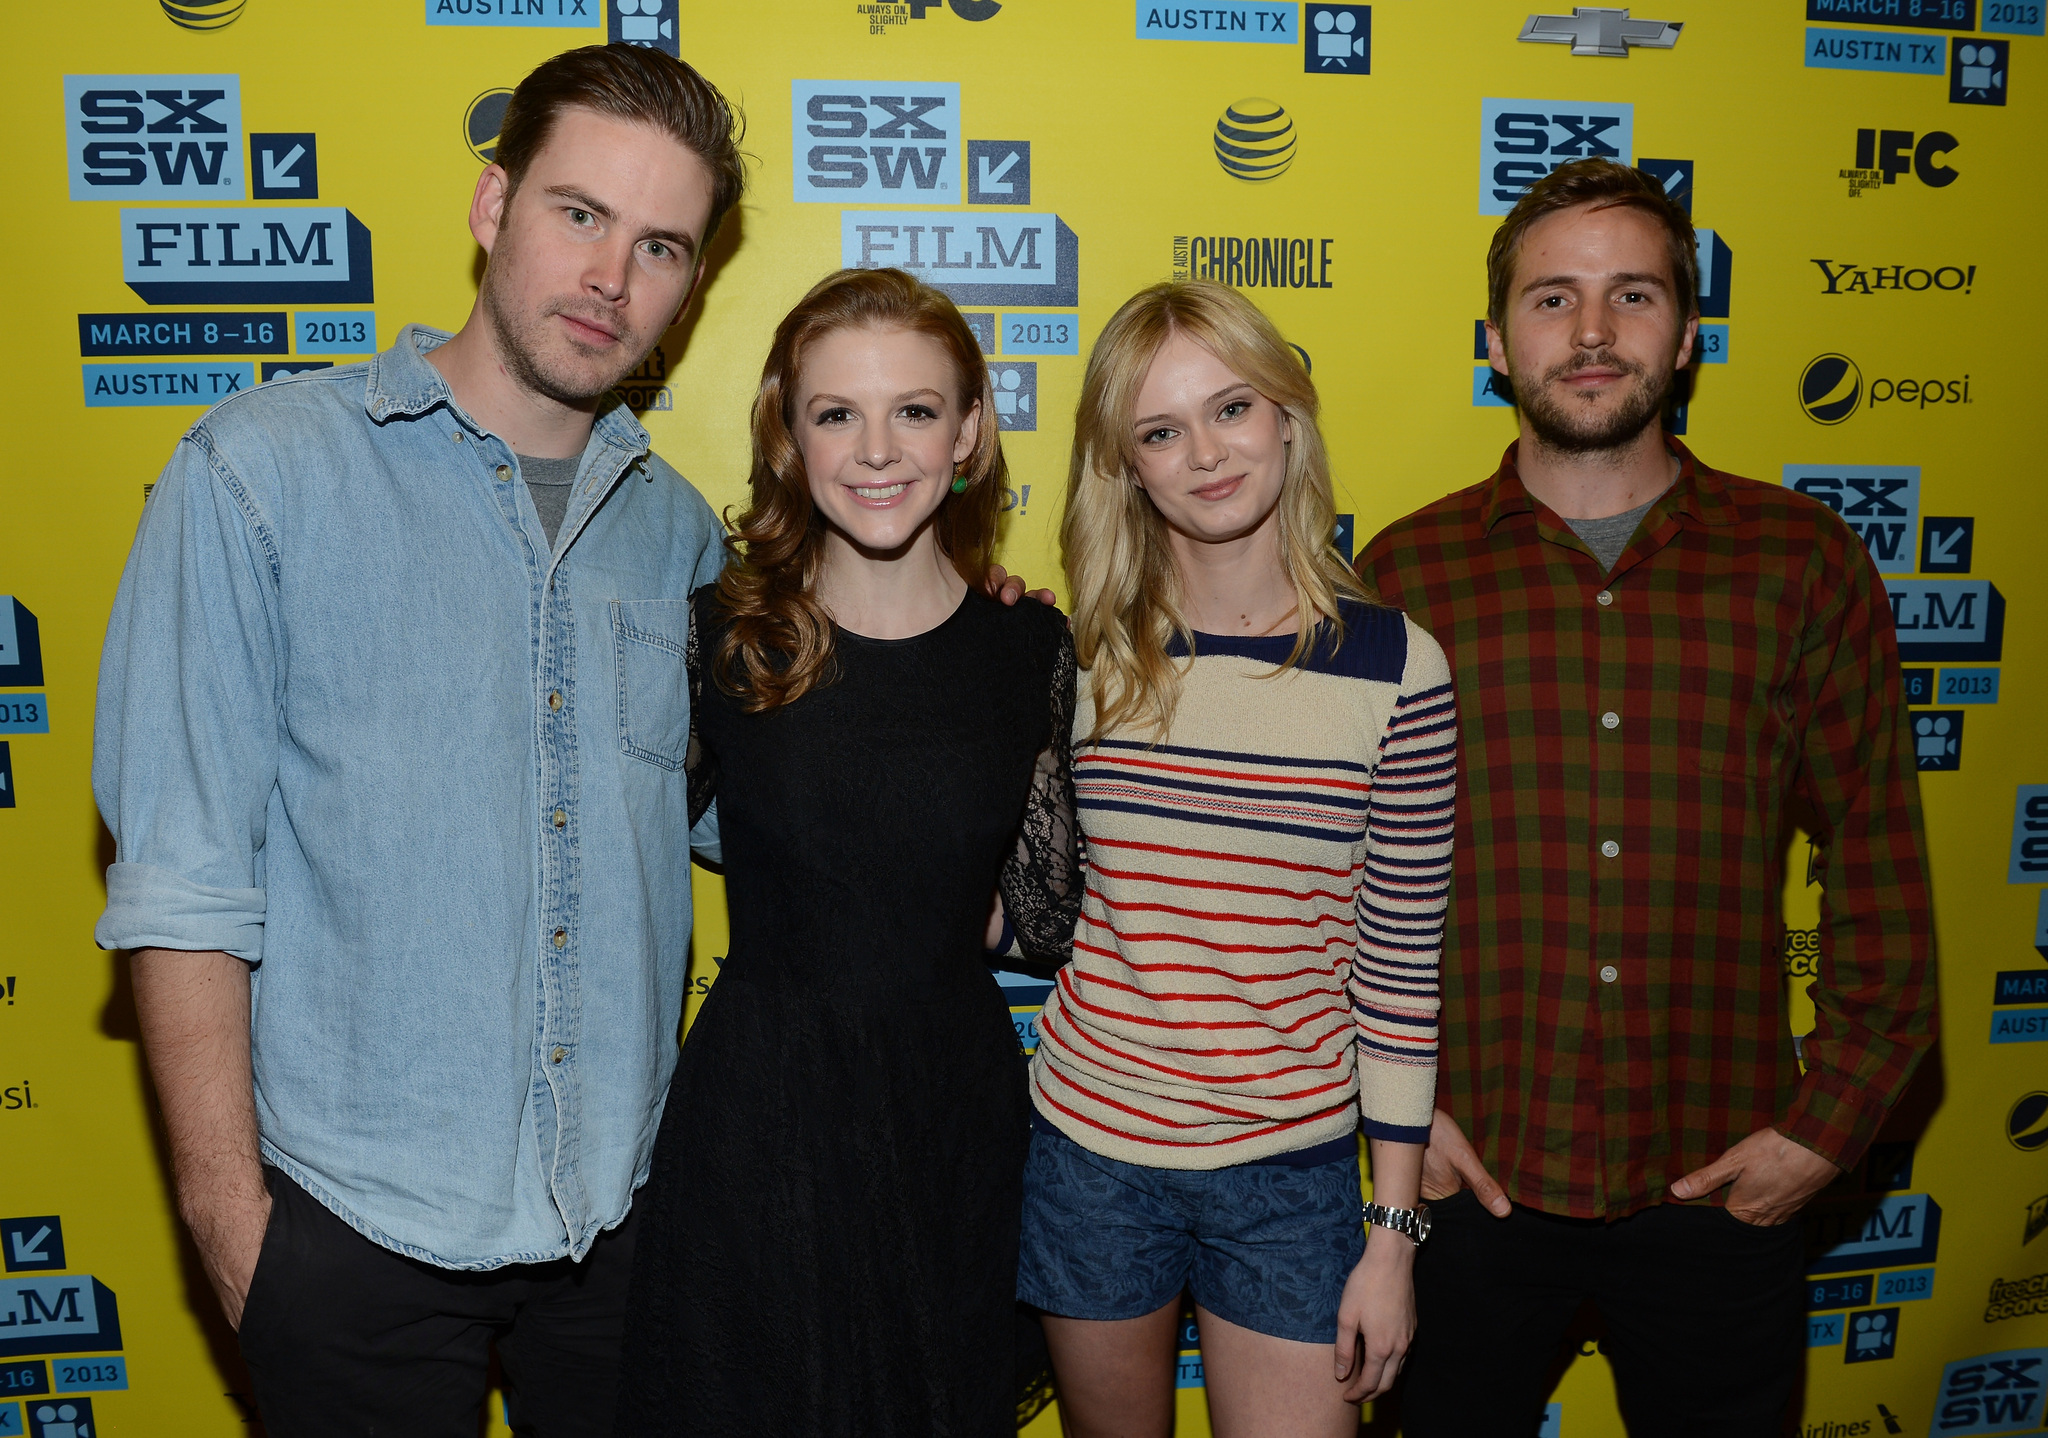 Ashley Bell, Sara Paxton, Zach Cregger, and Michael Stahl-David at an event for Love & Air Sex (2013)